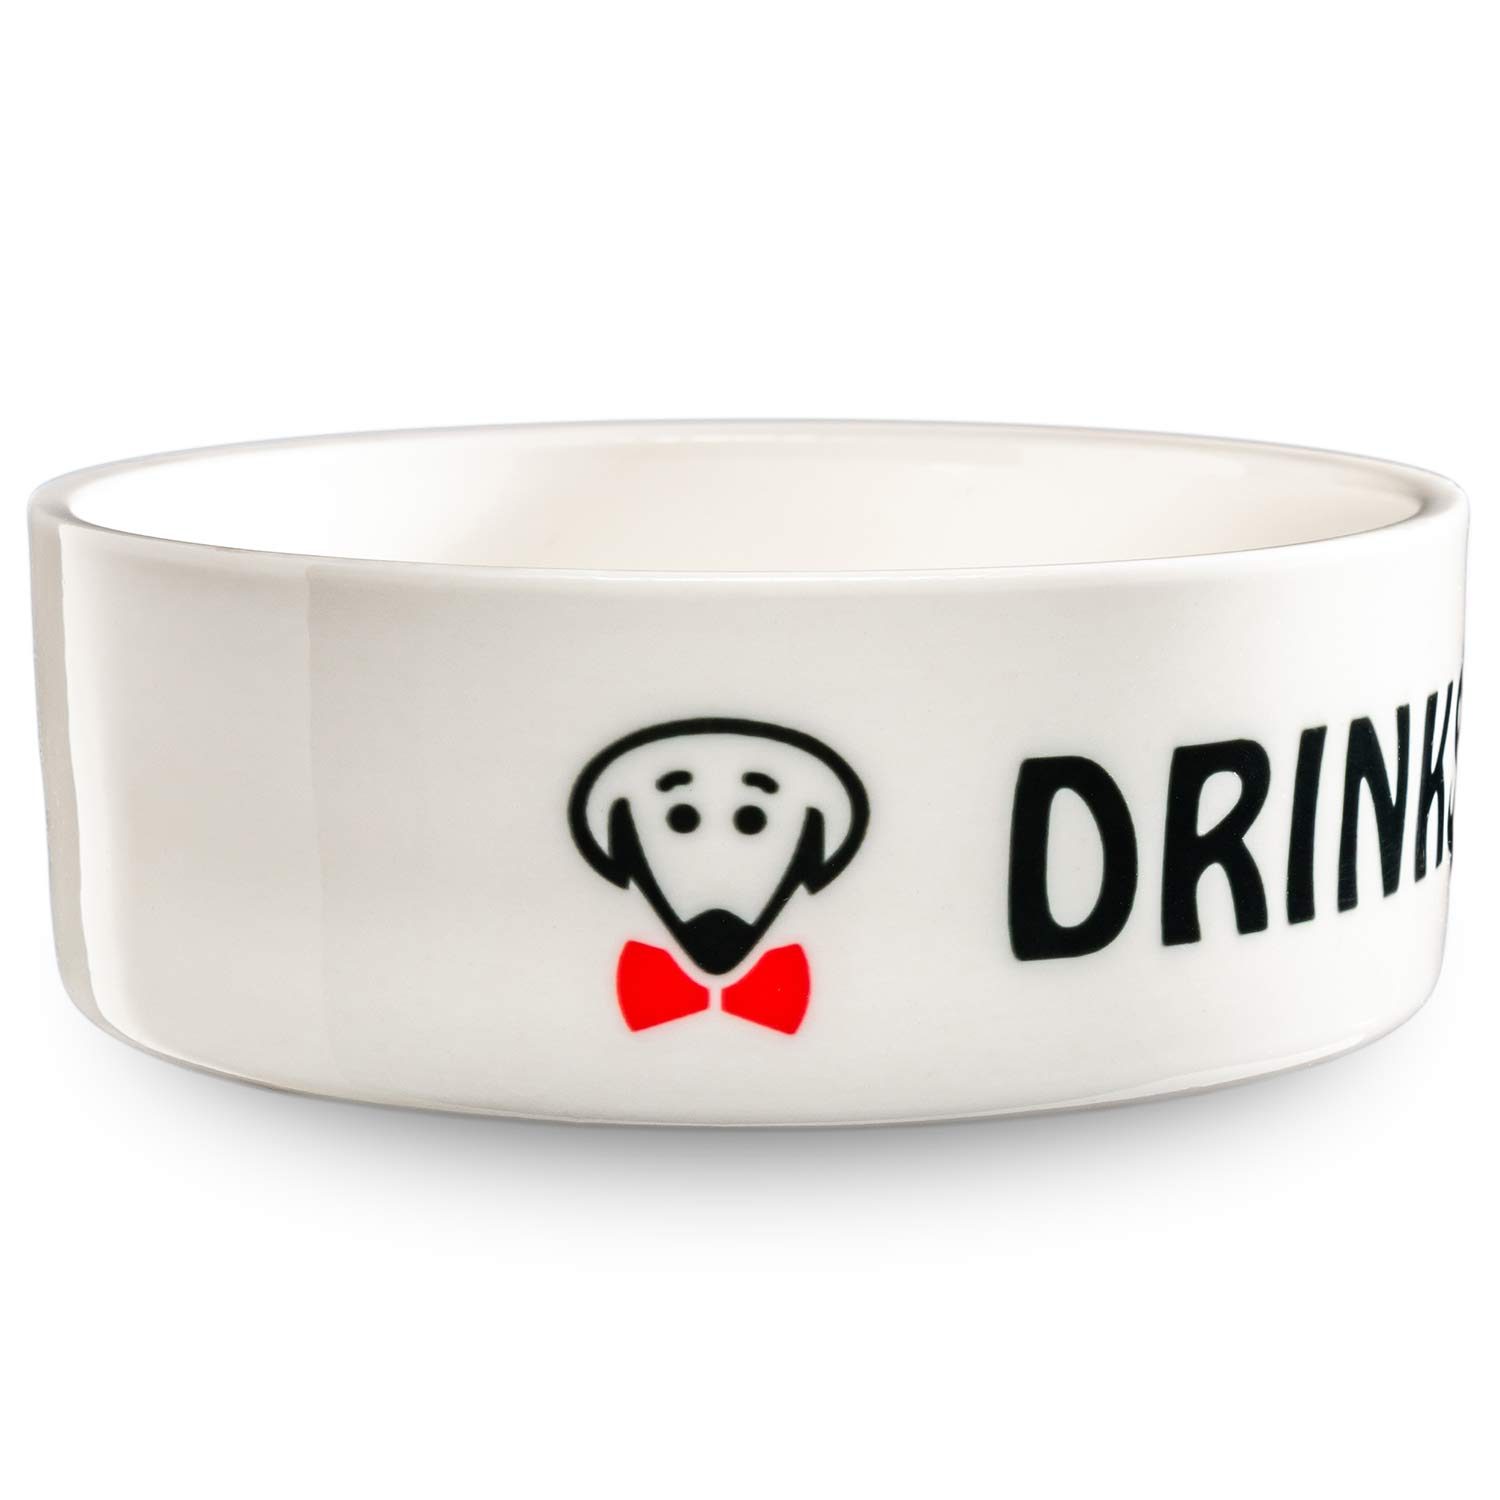 Drinks for the Boss pet bowl in white by Beau Tyler